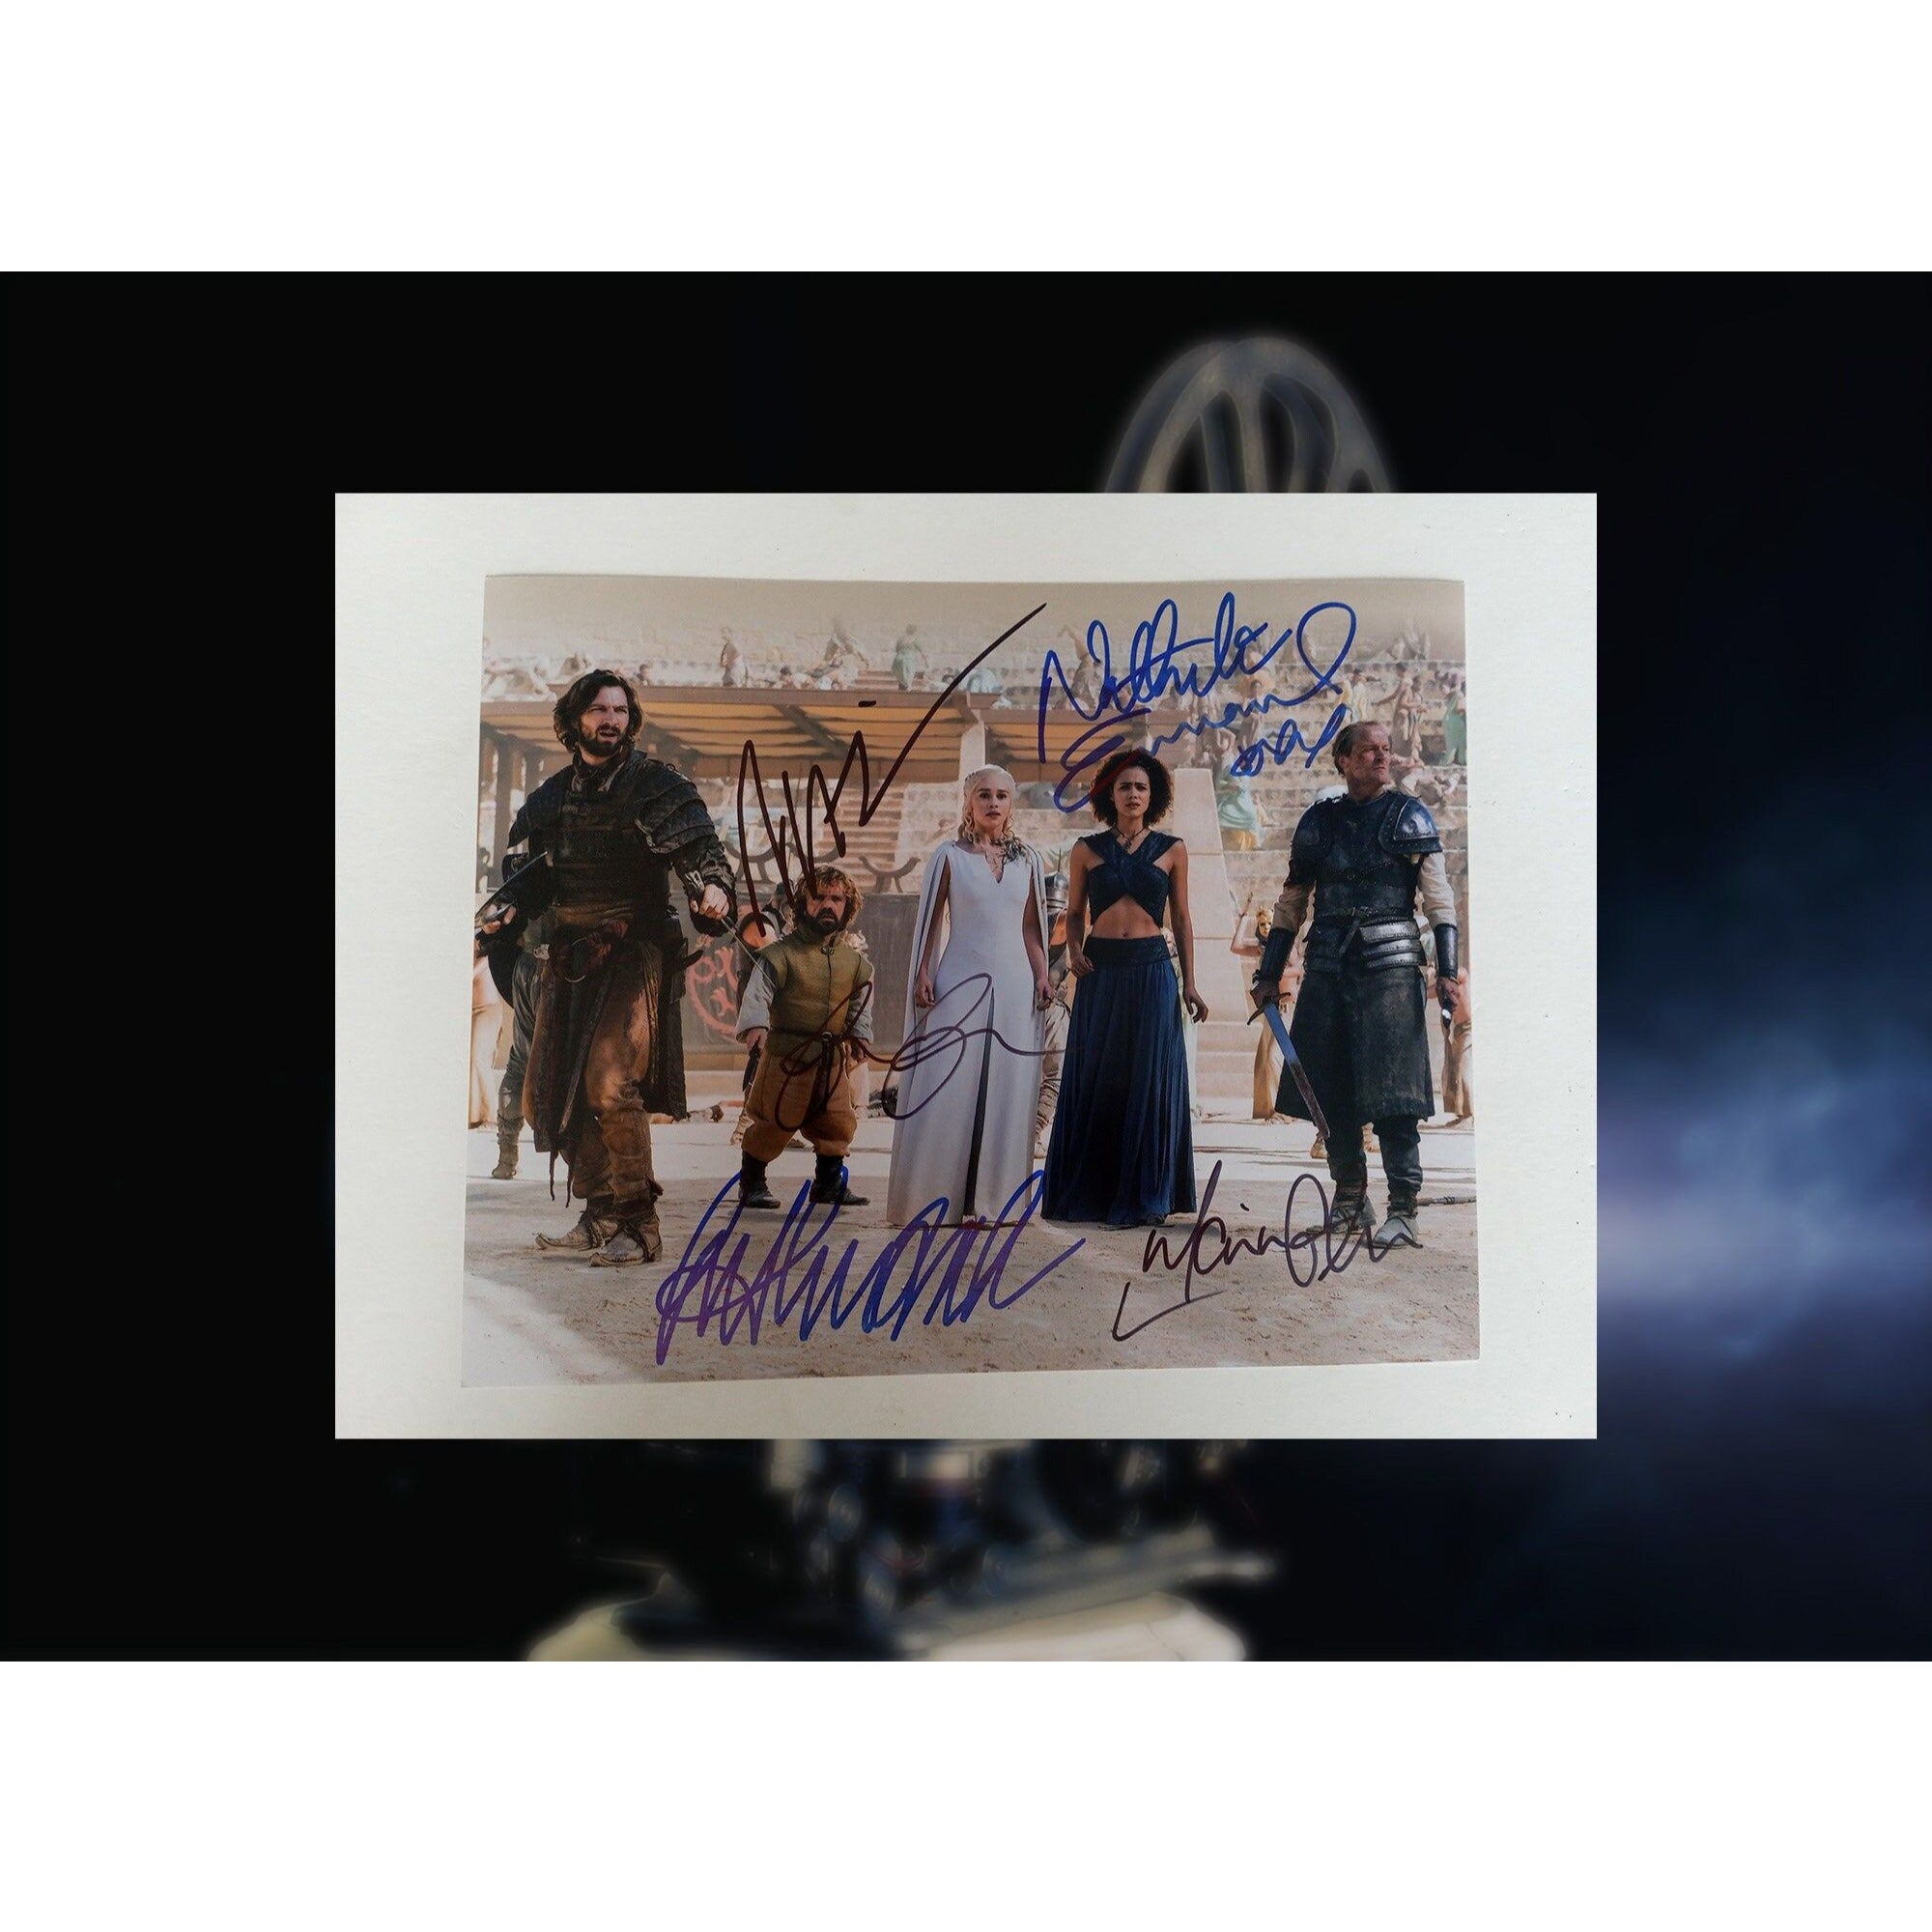 Game of Thrones Peter Dinklage, Emilia Clarke, Lilia Hadley 8 x 10 signed photo with proof